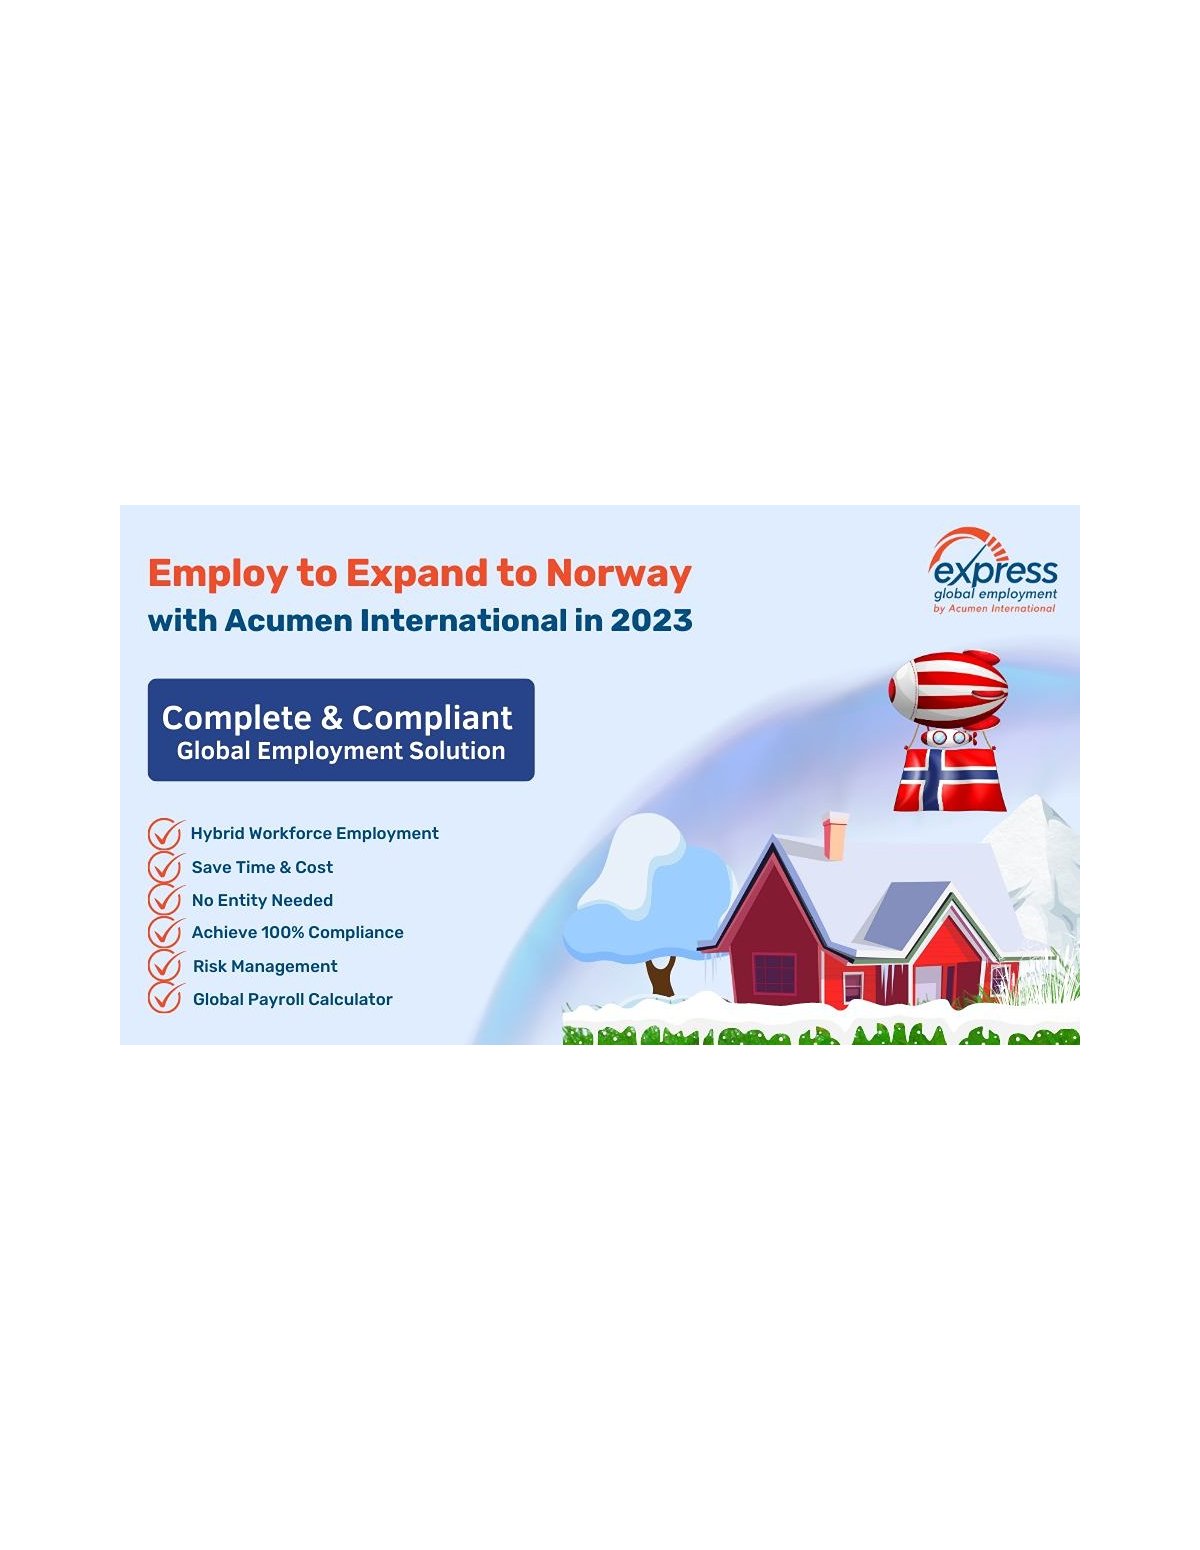 Future-Proof Complete & Compliant Global Employment Solution to Expand to Norway